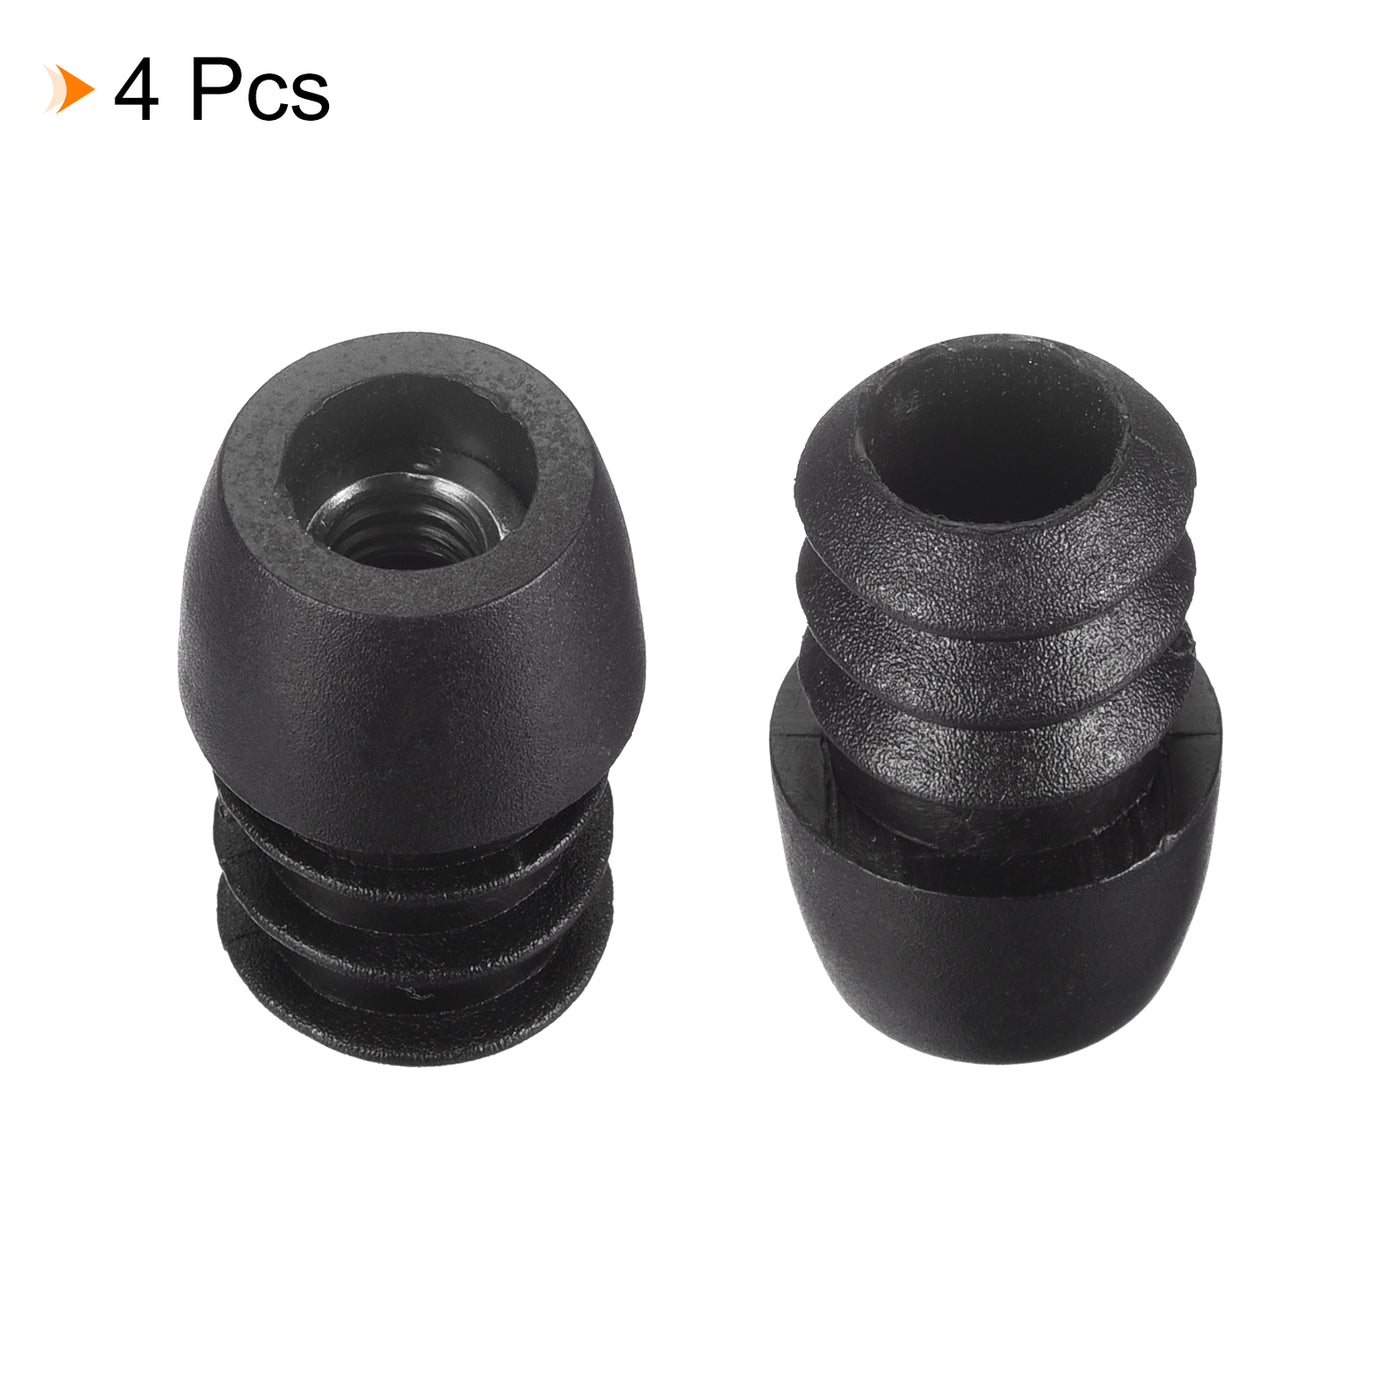 uxcell Uxcell 4Pcs 16mm/0.63" Caster Insert with Thread, M6 Thread for Furniture